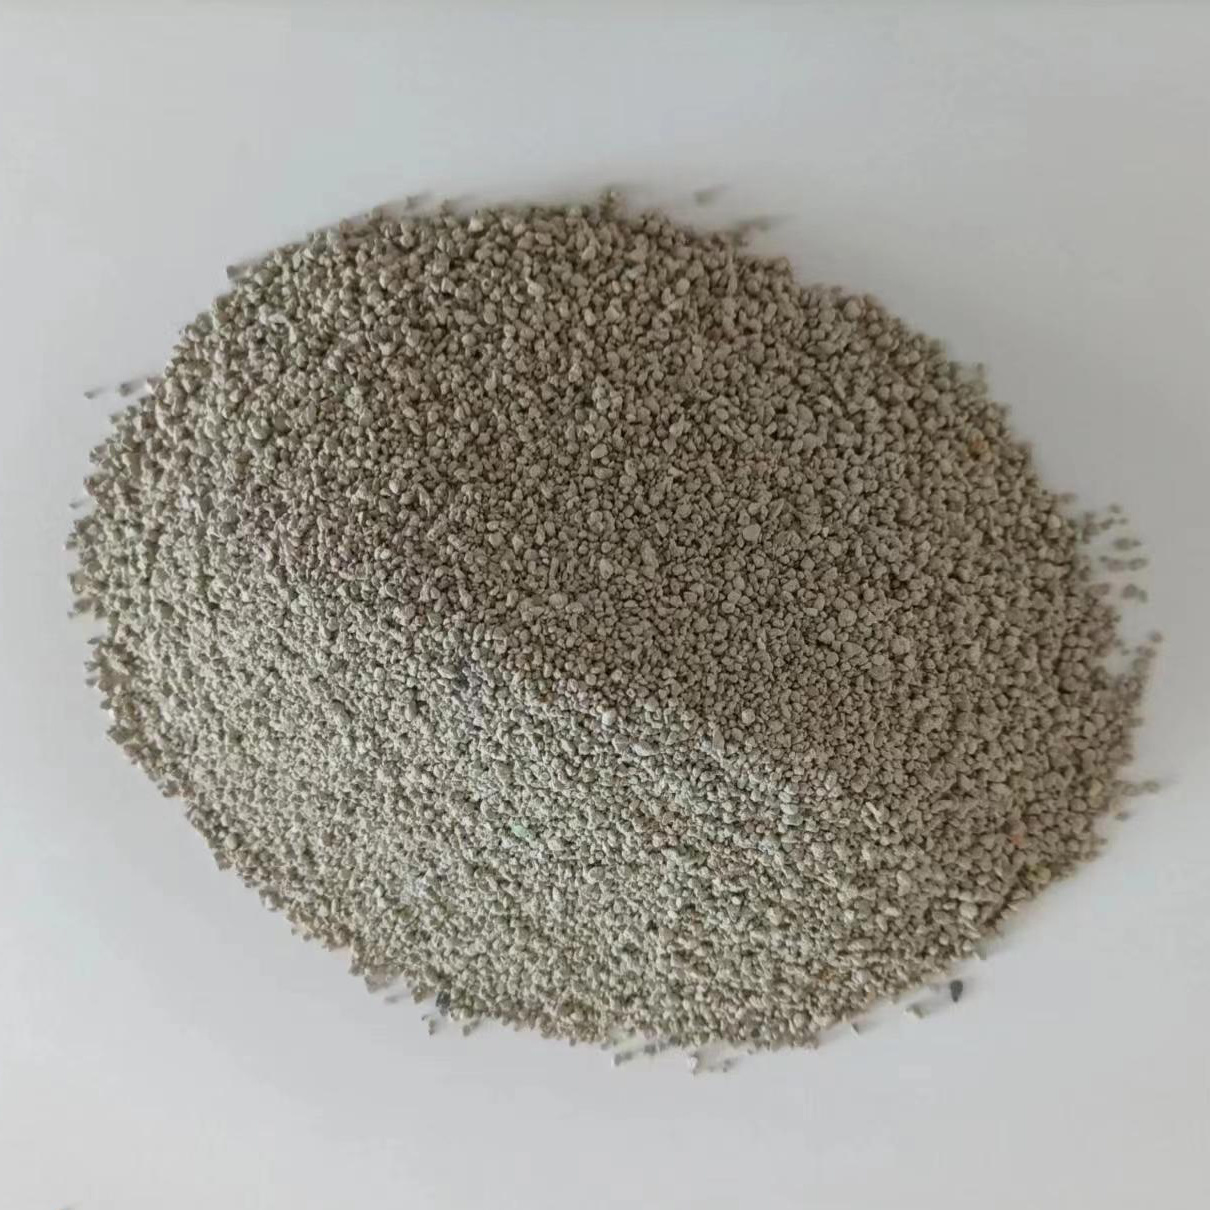 Crushed sand (ash) from raw ore